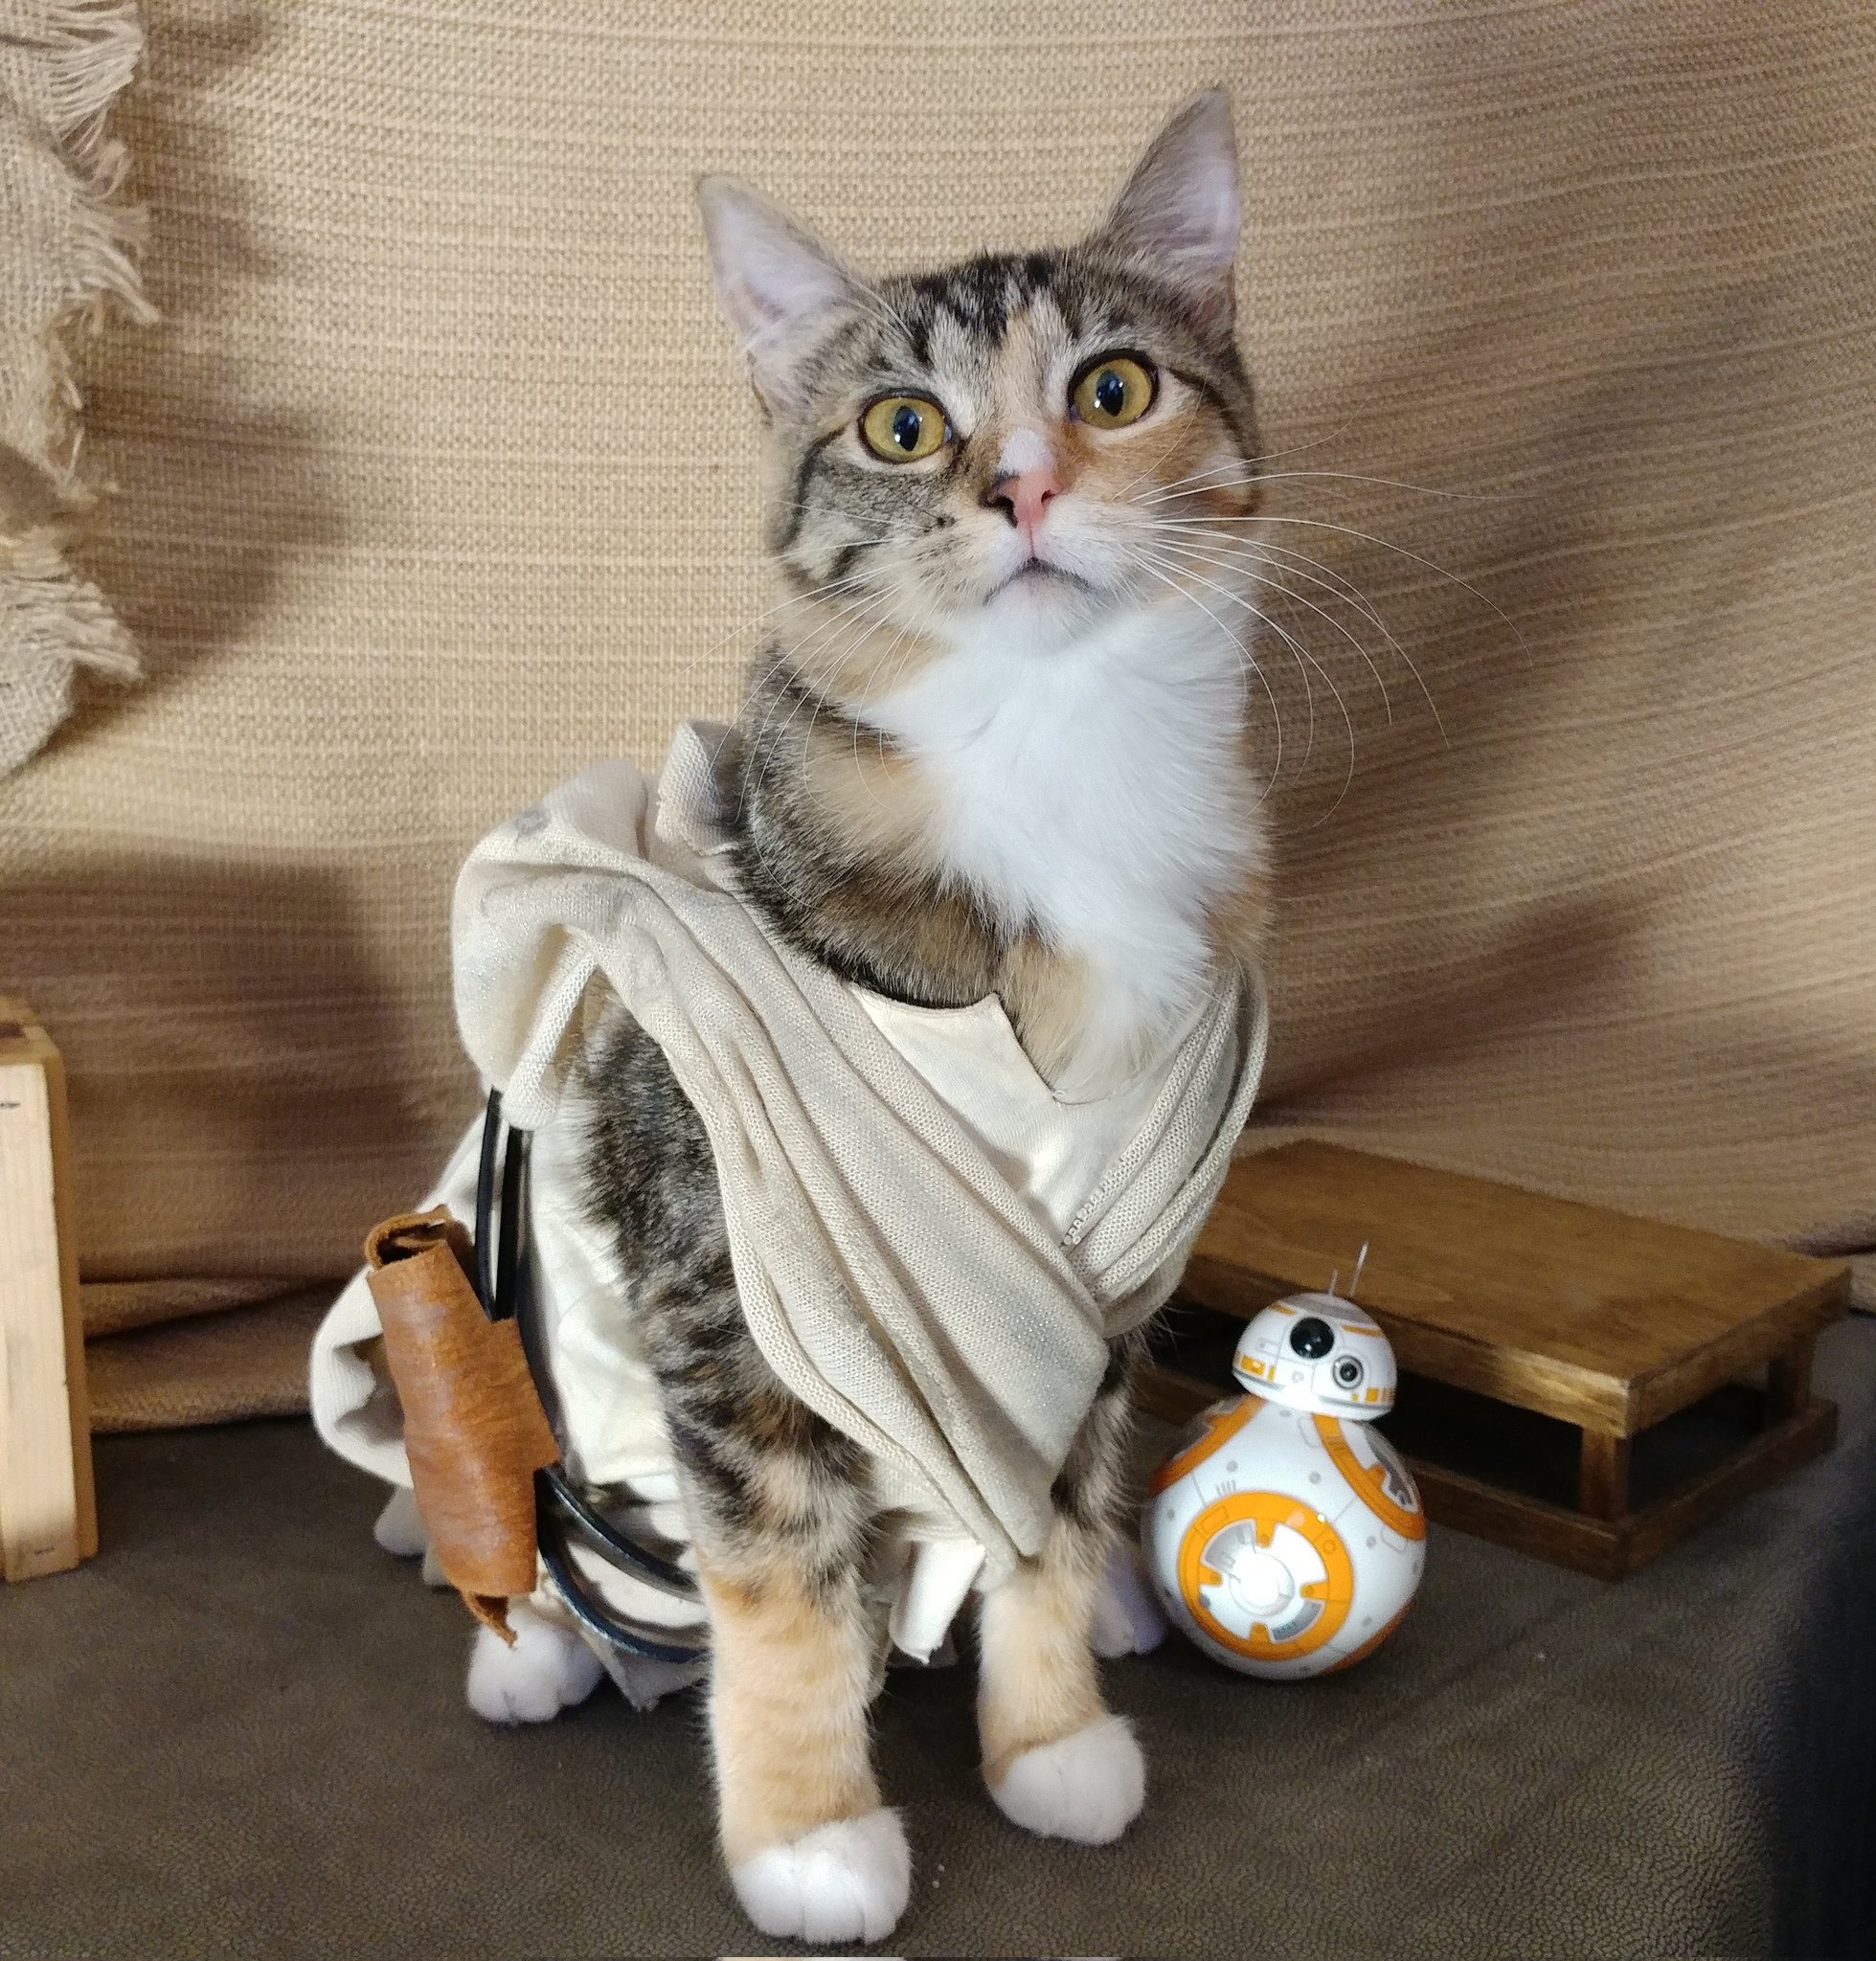 Cat Cosplay on X: "May the 4th be with you. https://t.co/olLYEMprxk" / X